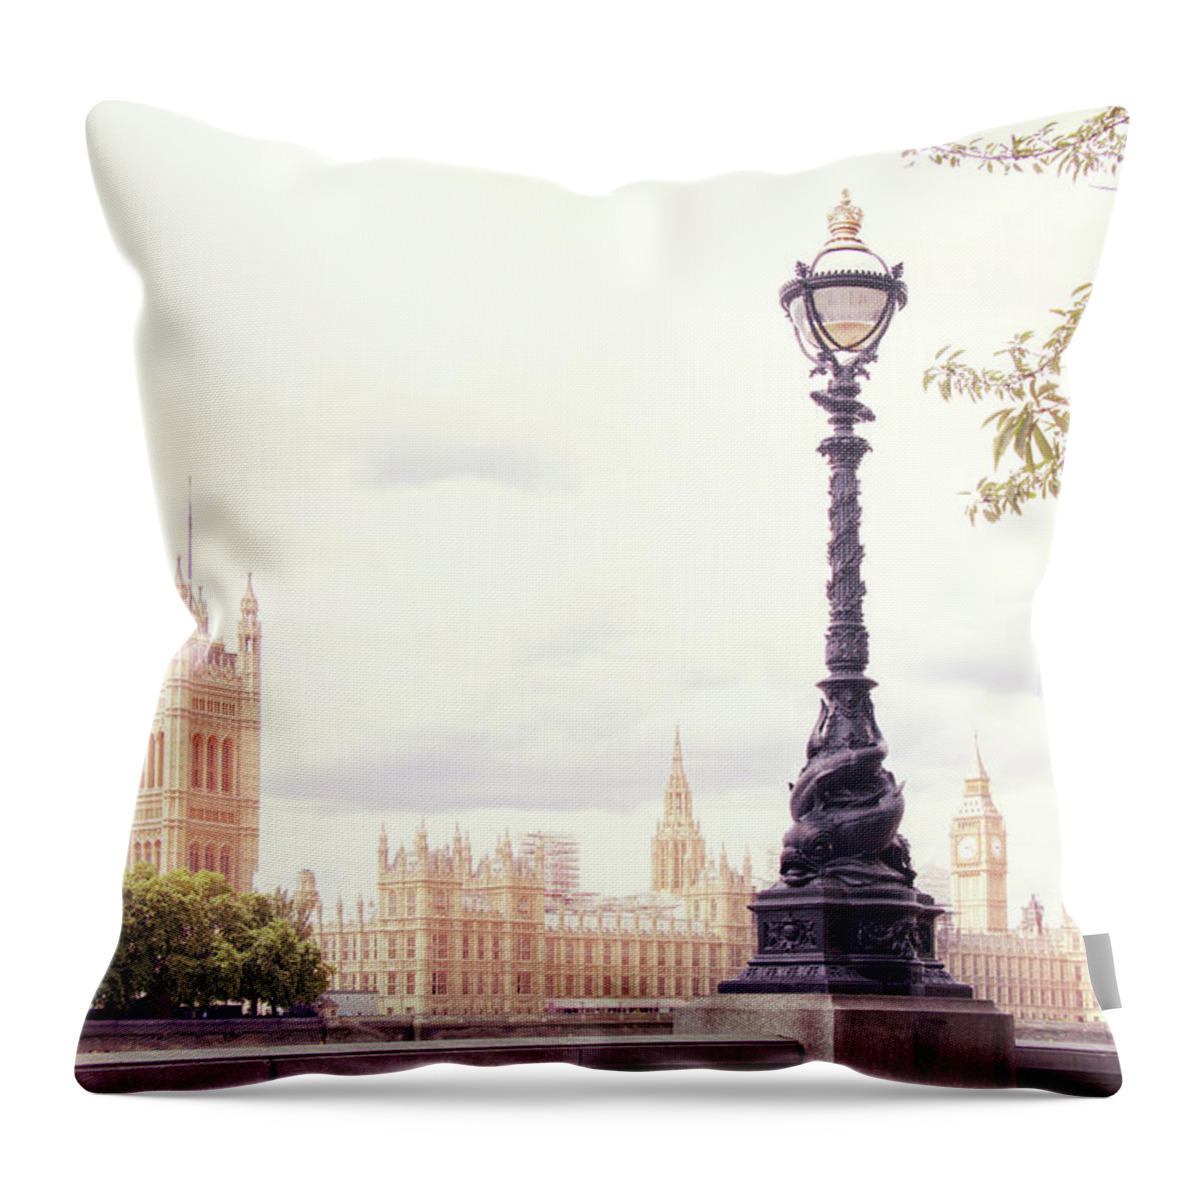 London Throw Pillow featuring the photograph It's Twenty Past Two by Iryna Goodall